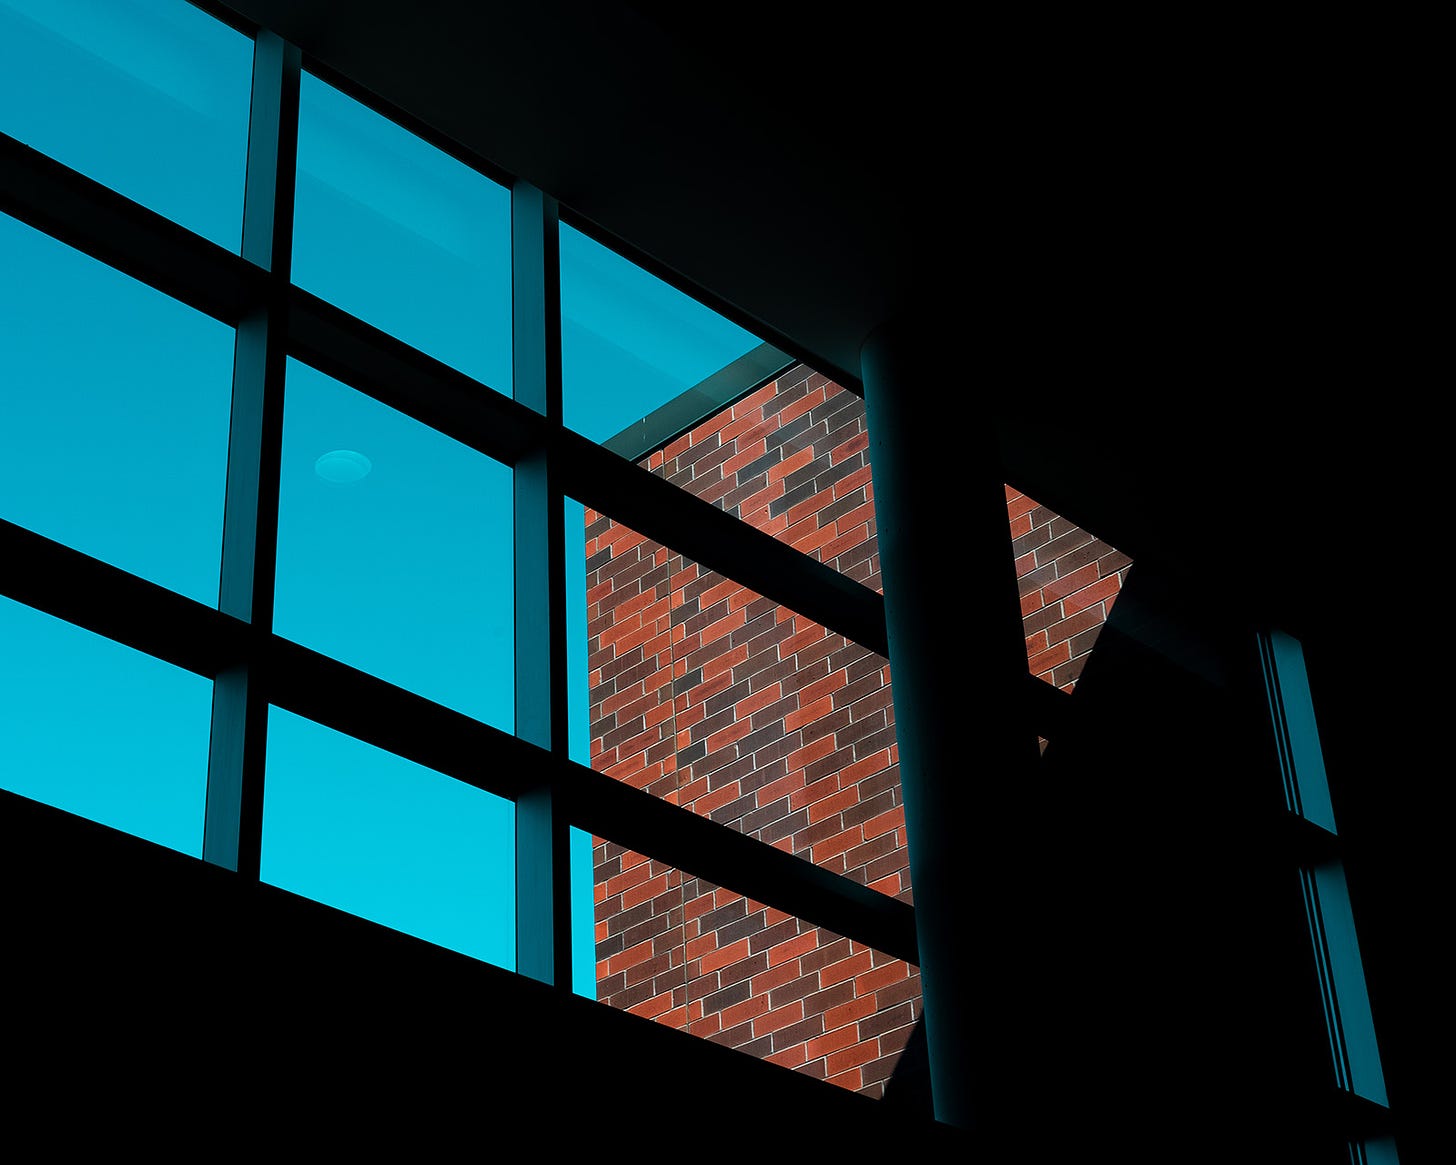 The facade of an orange brick building is viewed through a large window.  A clear blue sky frames the brick building